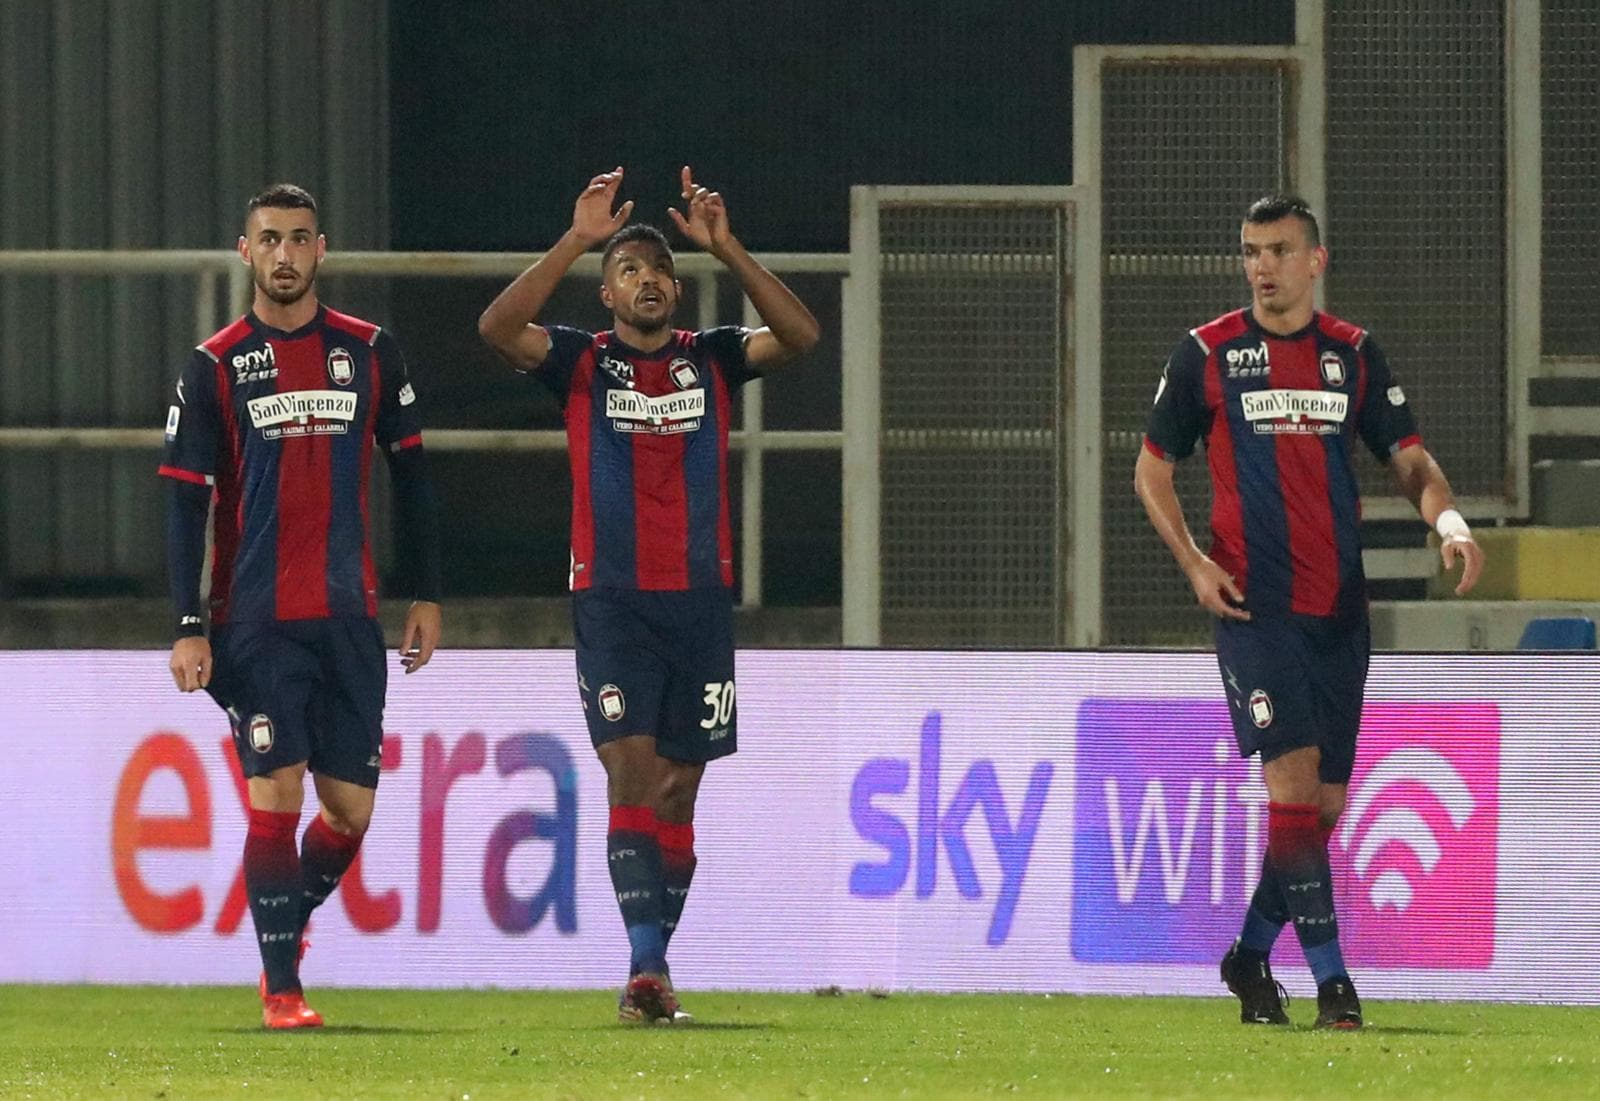 From cheeky lobs to threaded through balls, everything was on offer in Italian top-flight football. Here are our picks for top 5 goals from Round 14